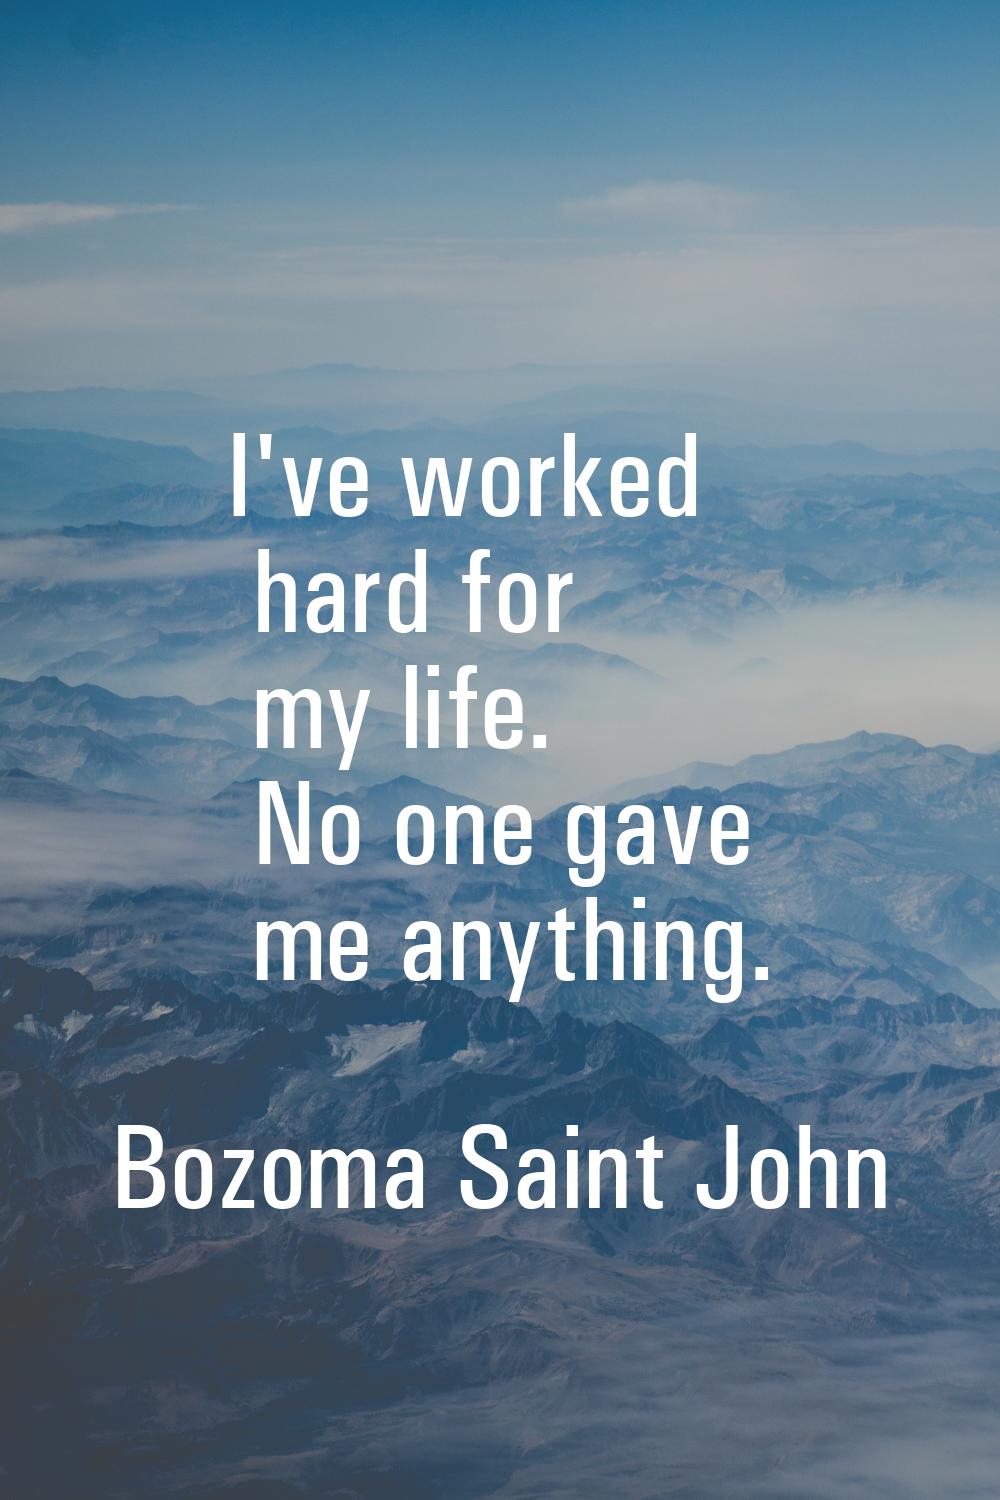 I've worked hard for my life. No one gave me anything.